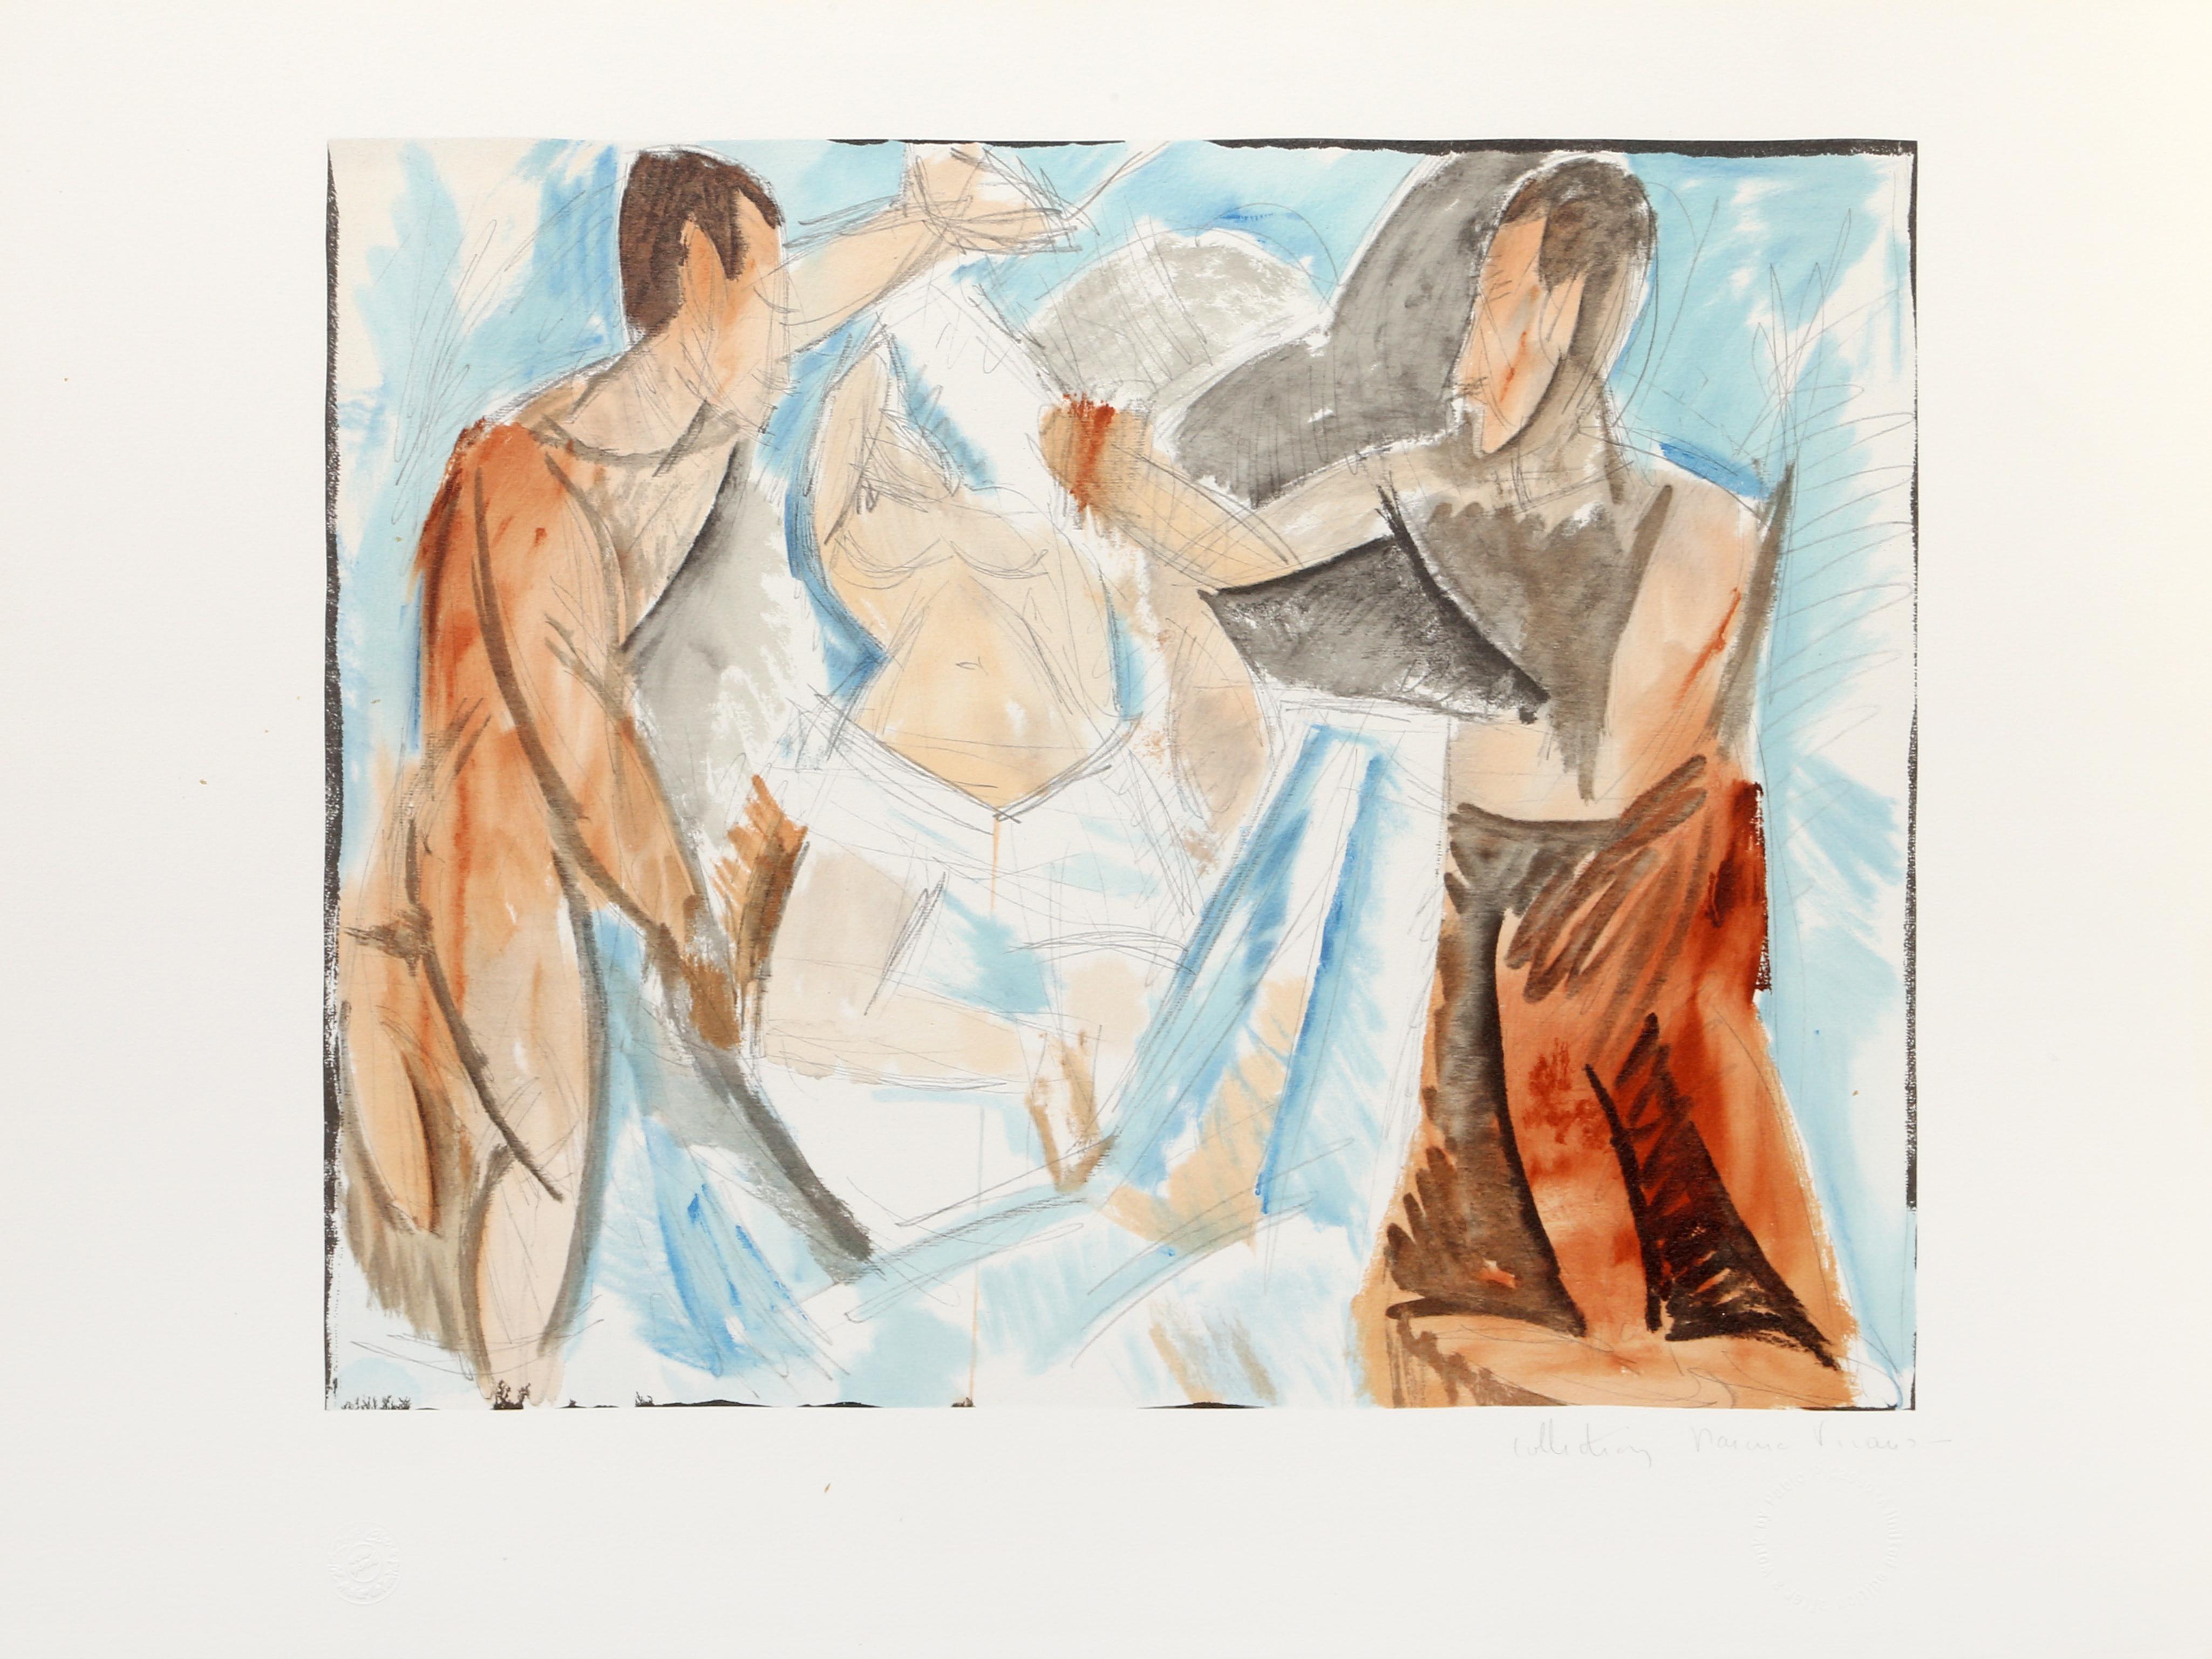 Intertwined throughout the composition, several figures rendered in hues of orange raise their arms and move about against a blue composition. Featuring the same color scheme and angular division of composition with nude figures, this piece bears a